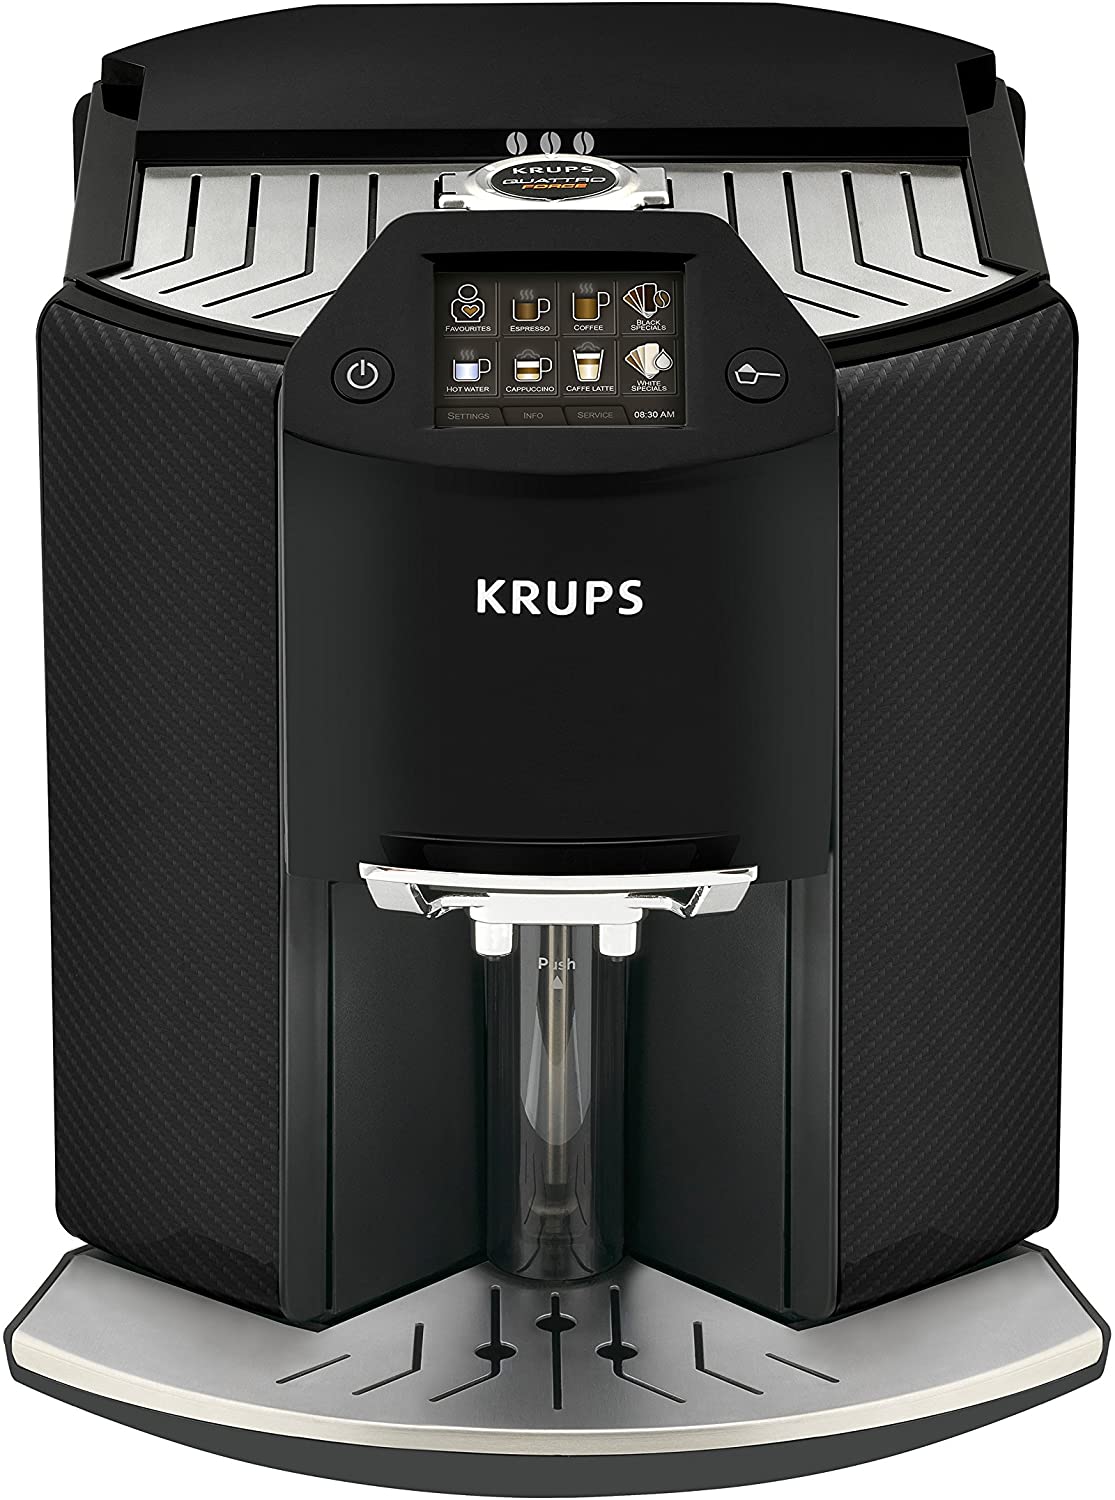 Krups Barista New Age Coffee Machine, One-Touch Cappuccino, with Coloured Touchscreen Display, 1.6 Litres, Carbon